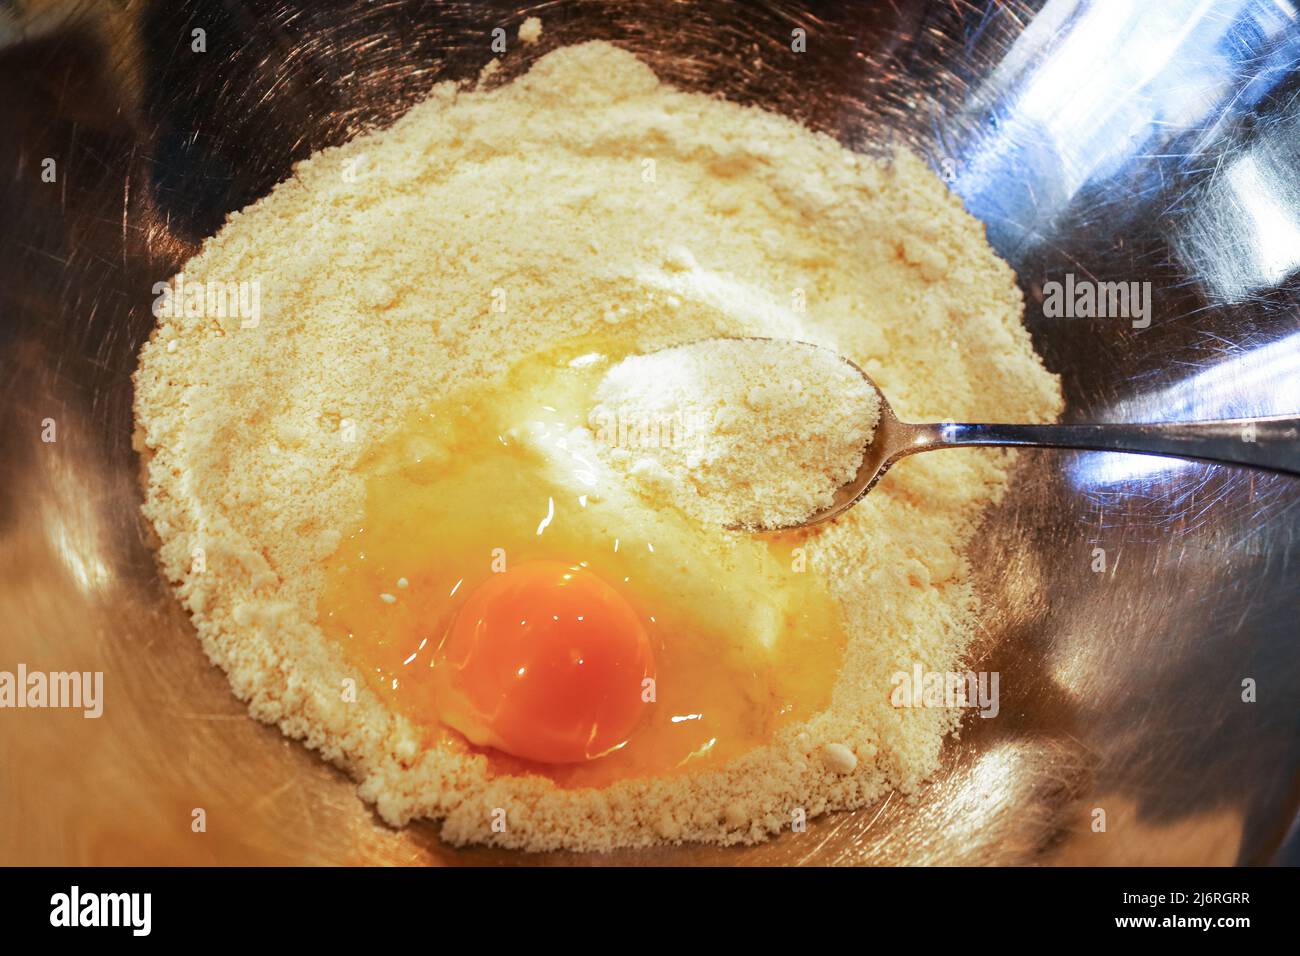 Gluten free low carb cooking - An egg broken into a pile of almond flour with a spoon ready to stir it up in a stainless steal bowl - closeup Stock Photo